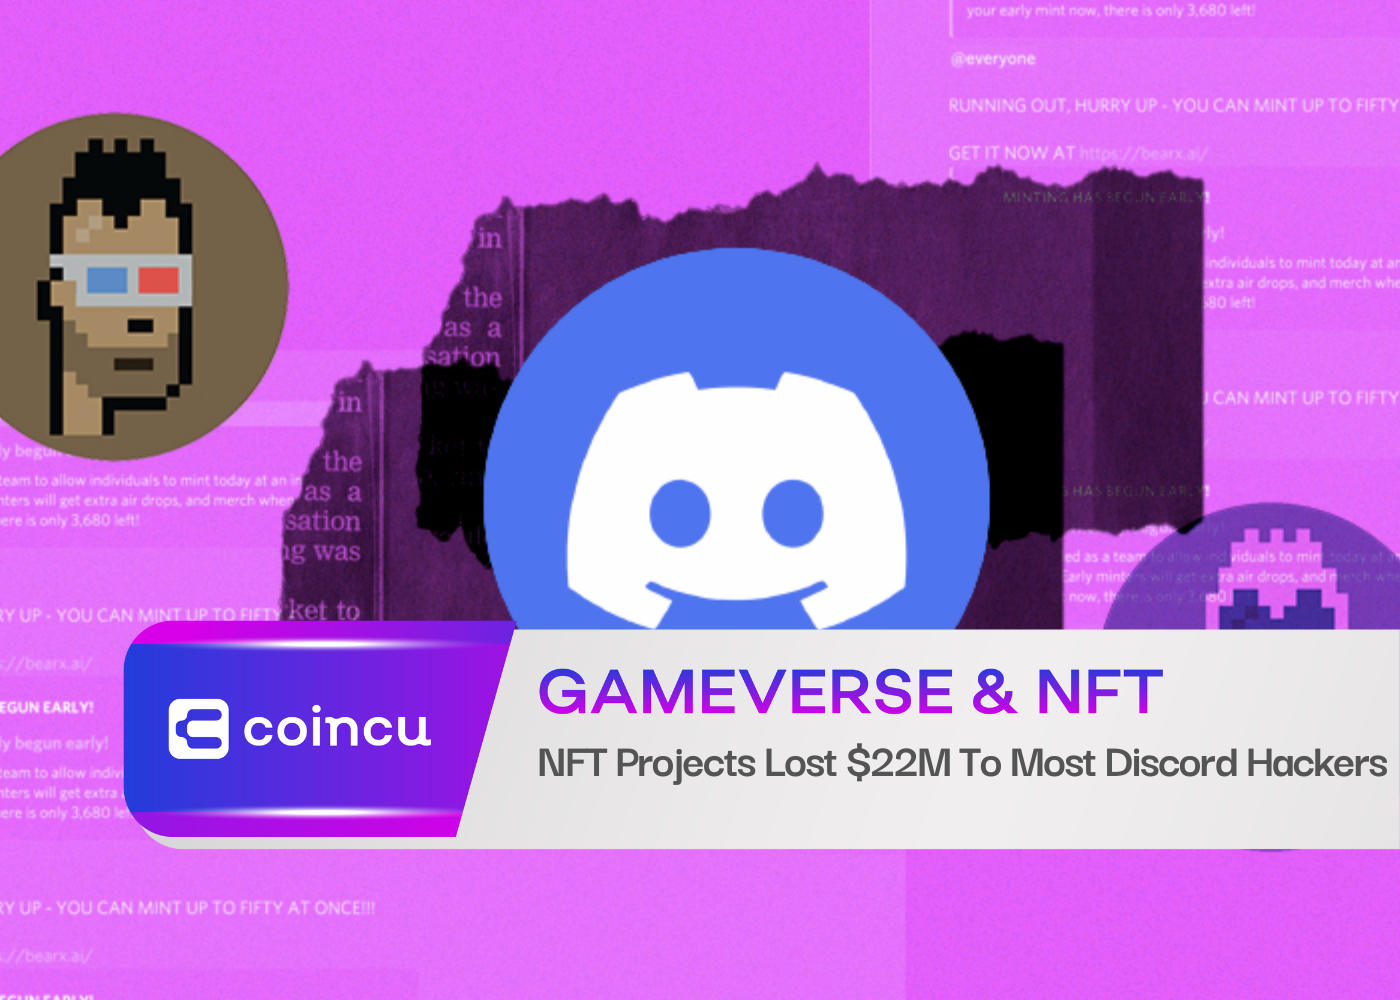 NFT Projects Lost $22M To Most Discord Hackers